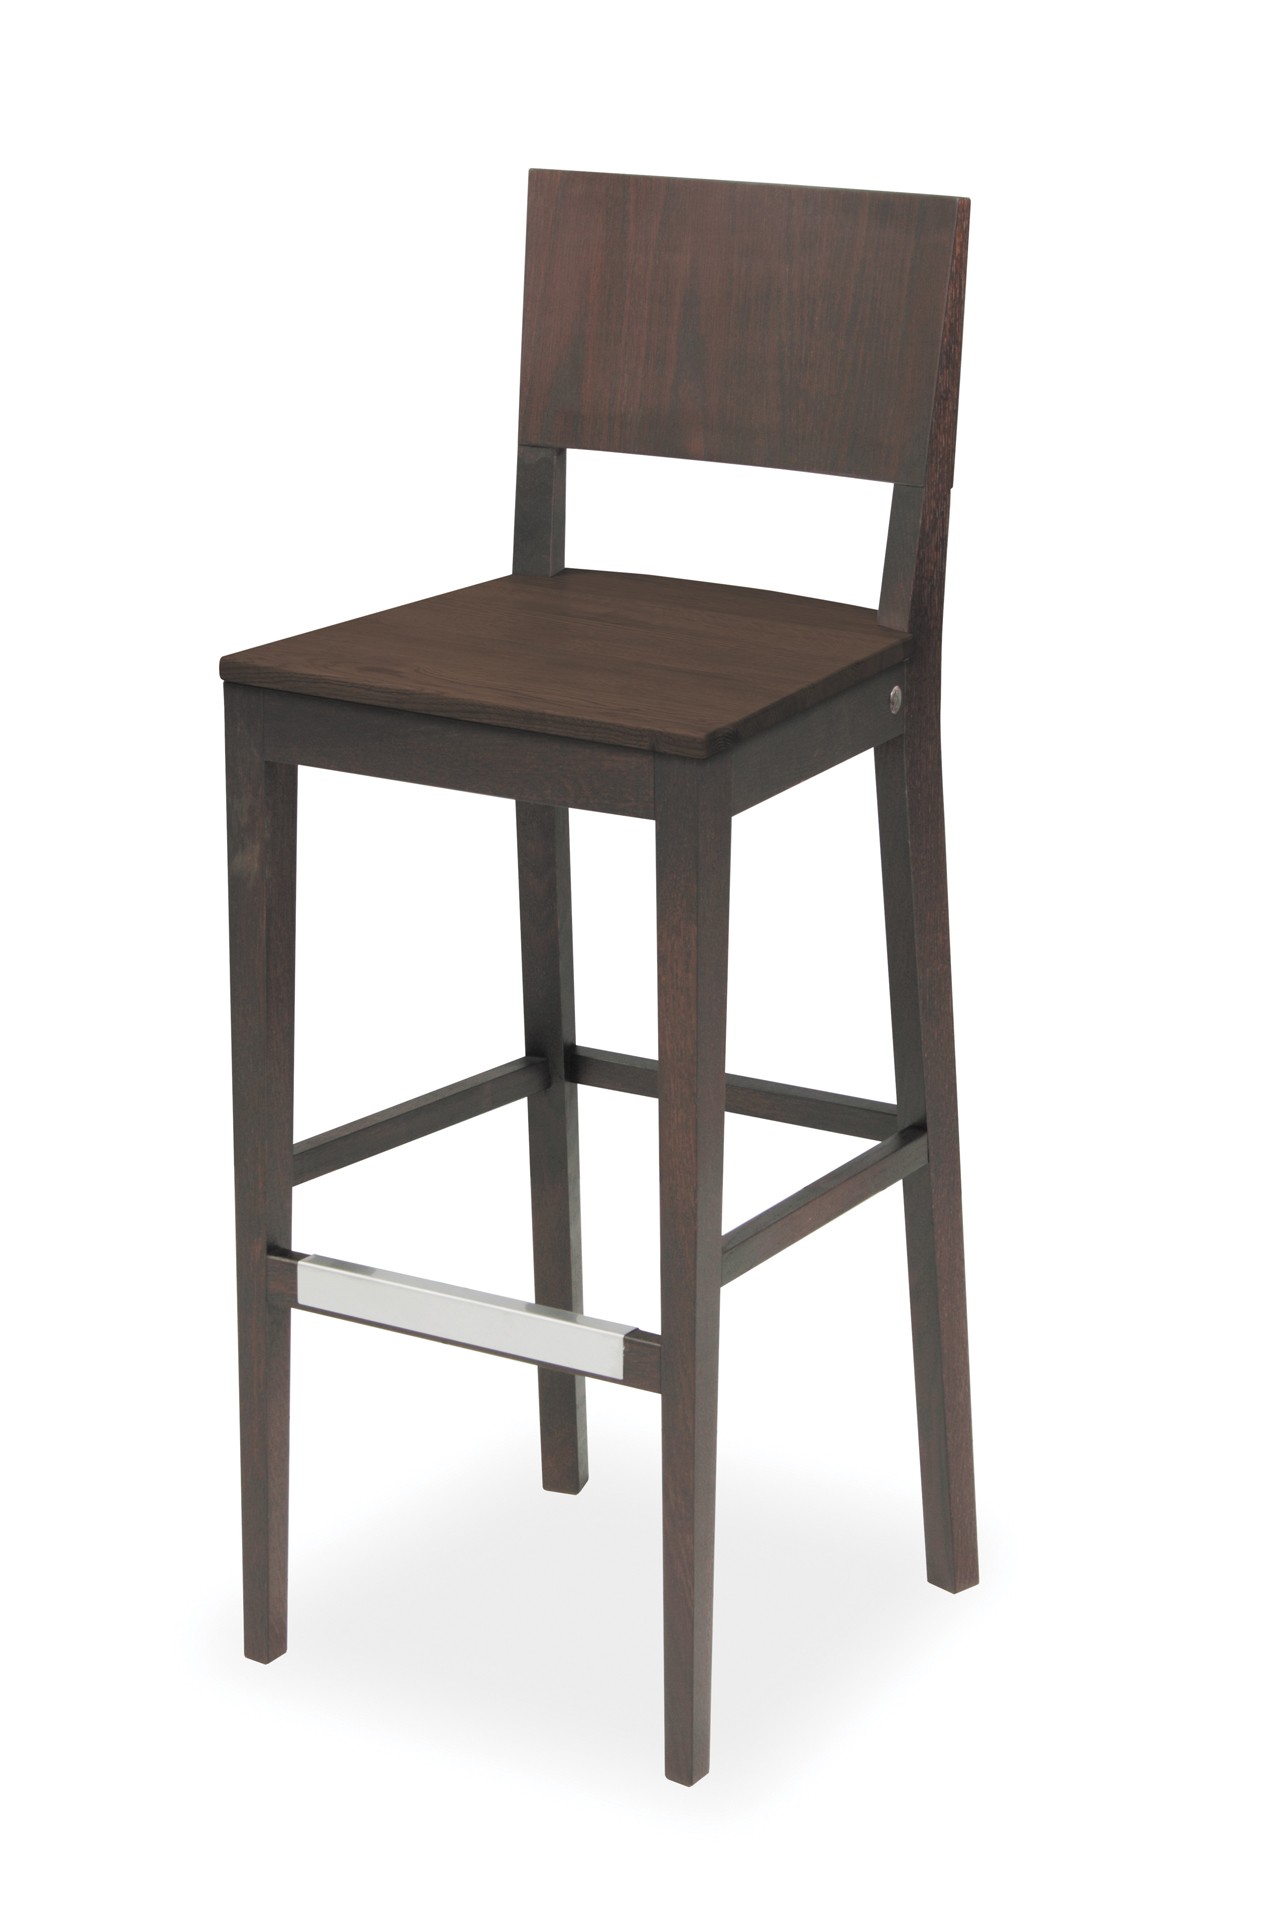 EDITA BAR STOOL WHOLLY WOODEN WITH STAINLESS SHIELD